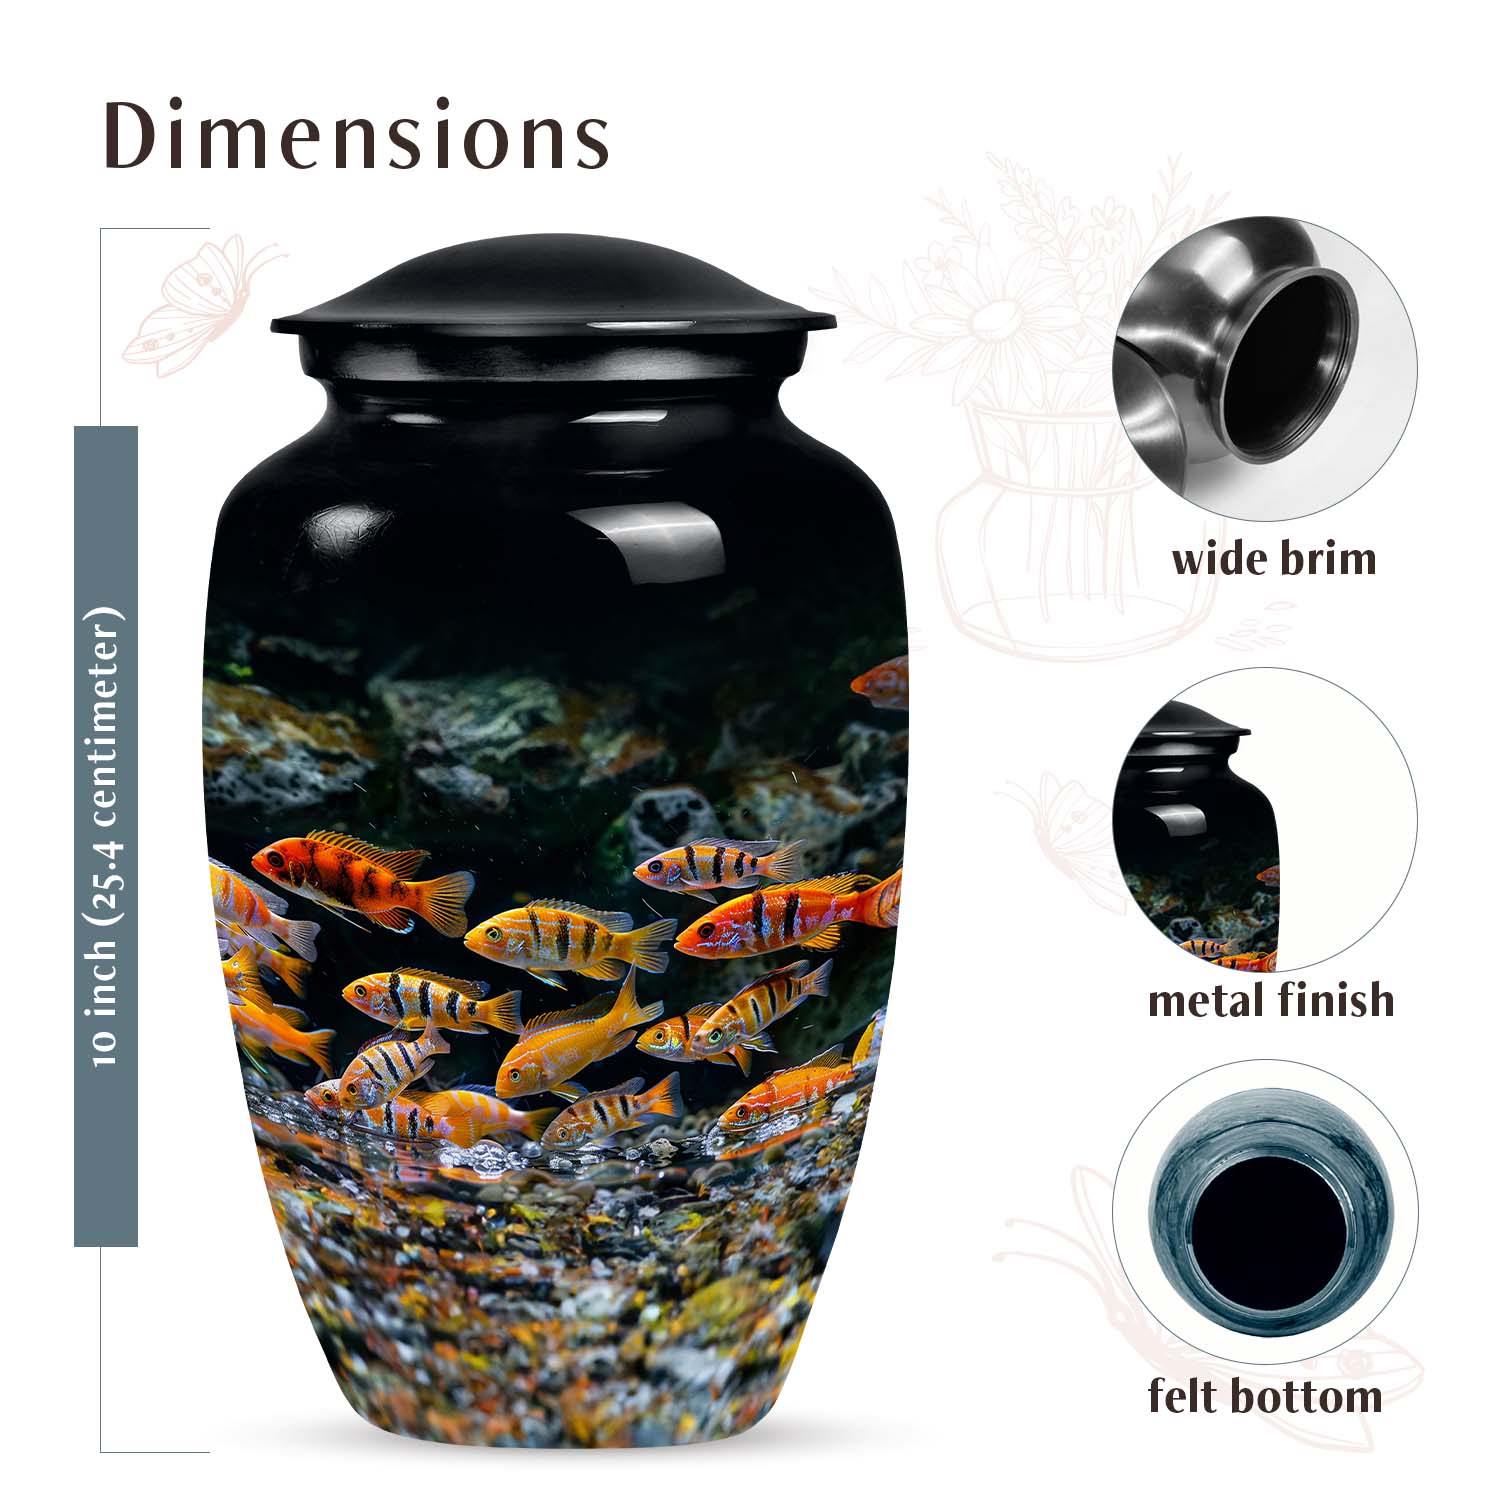 Large and unique fish design urn, ideal for preserving mother's ashes